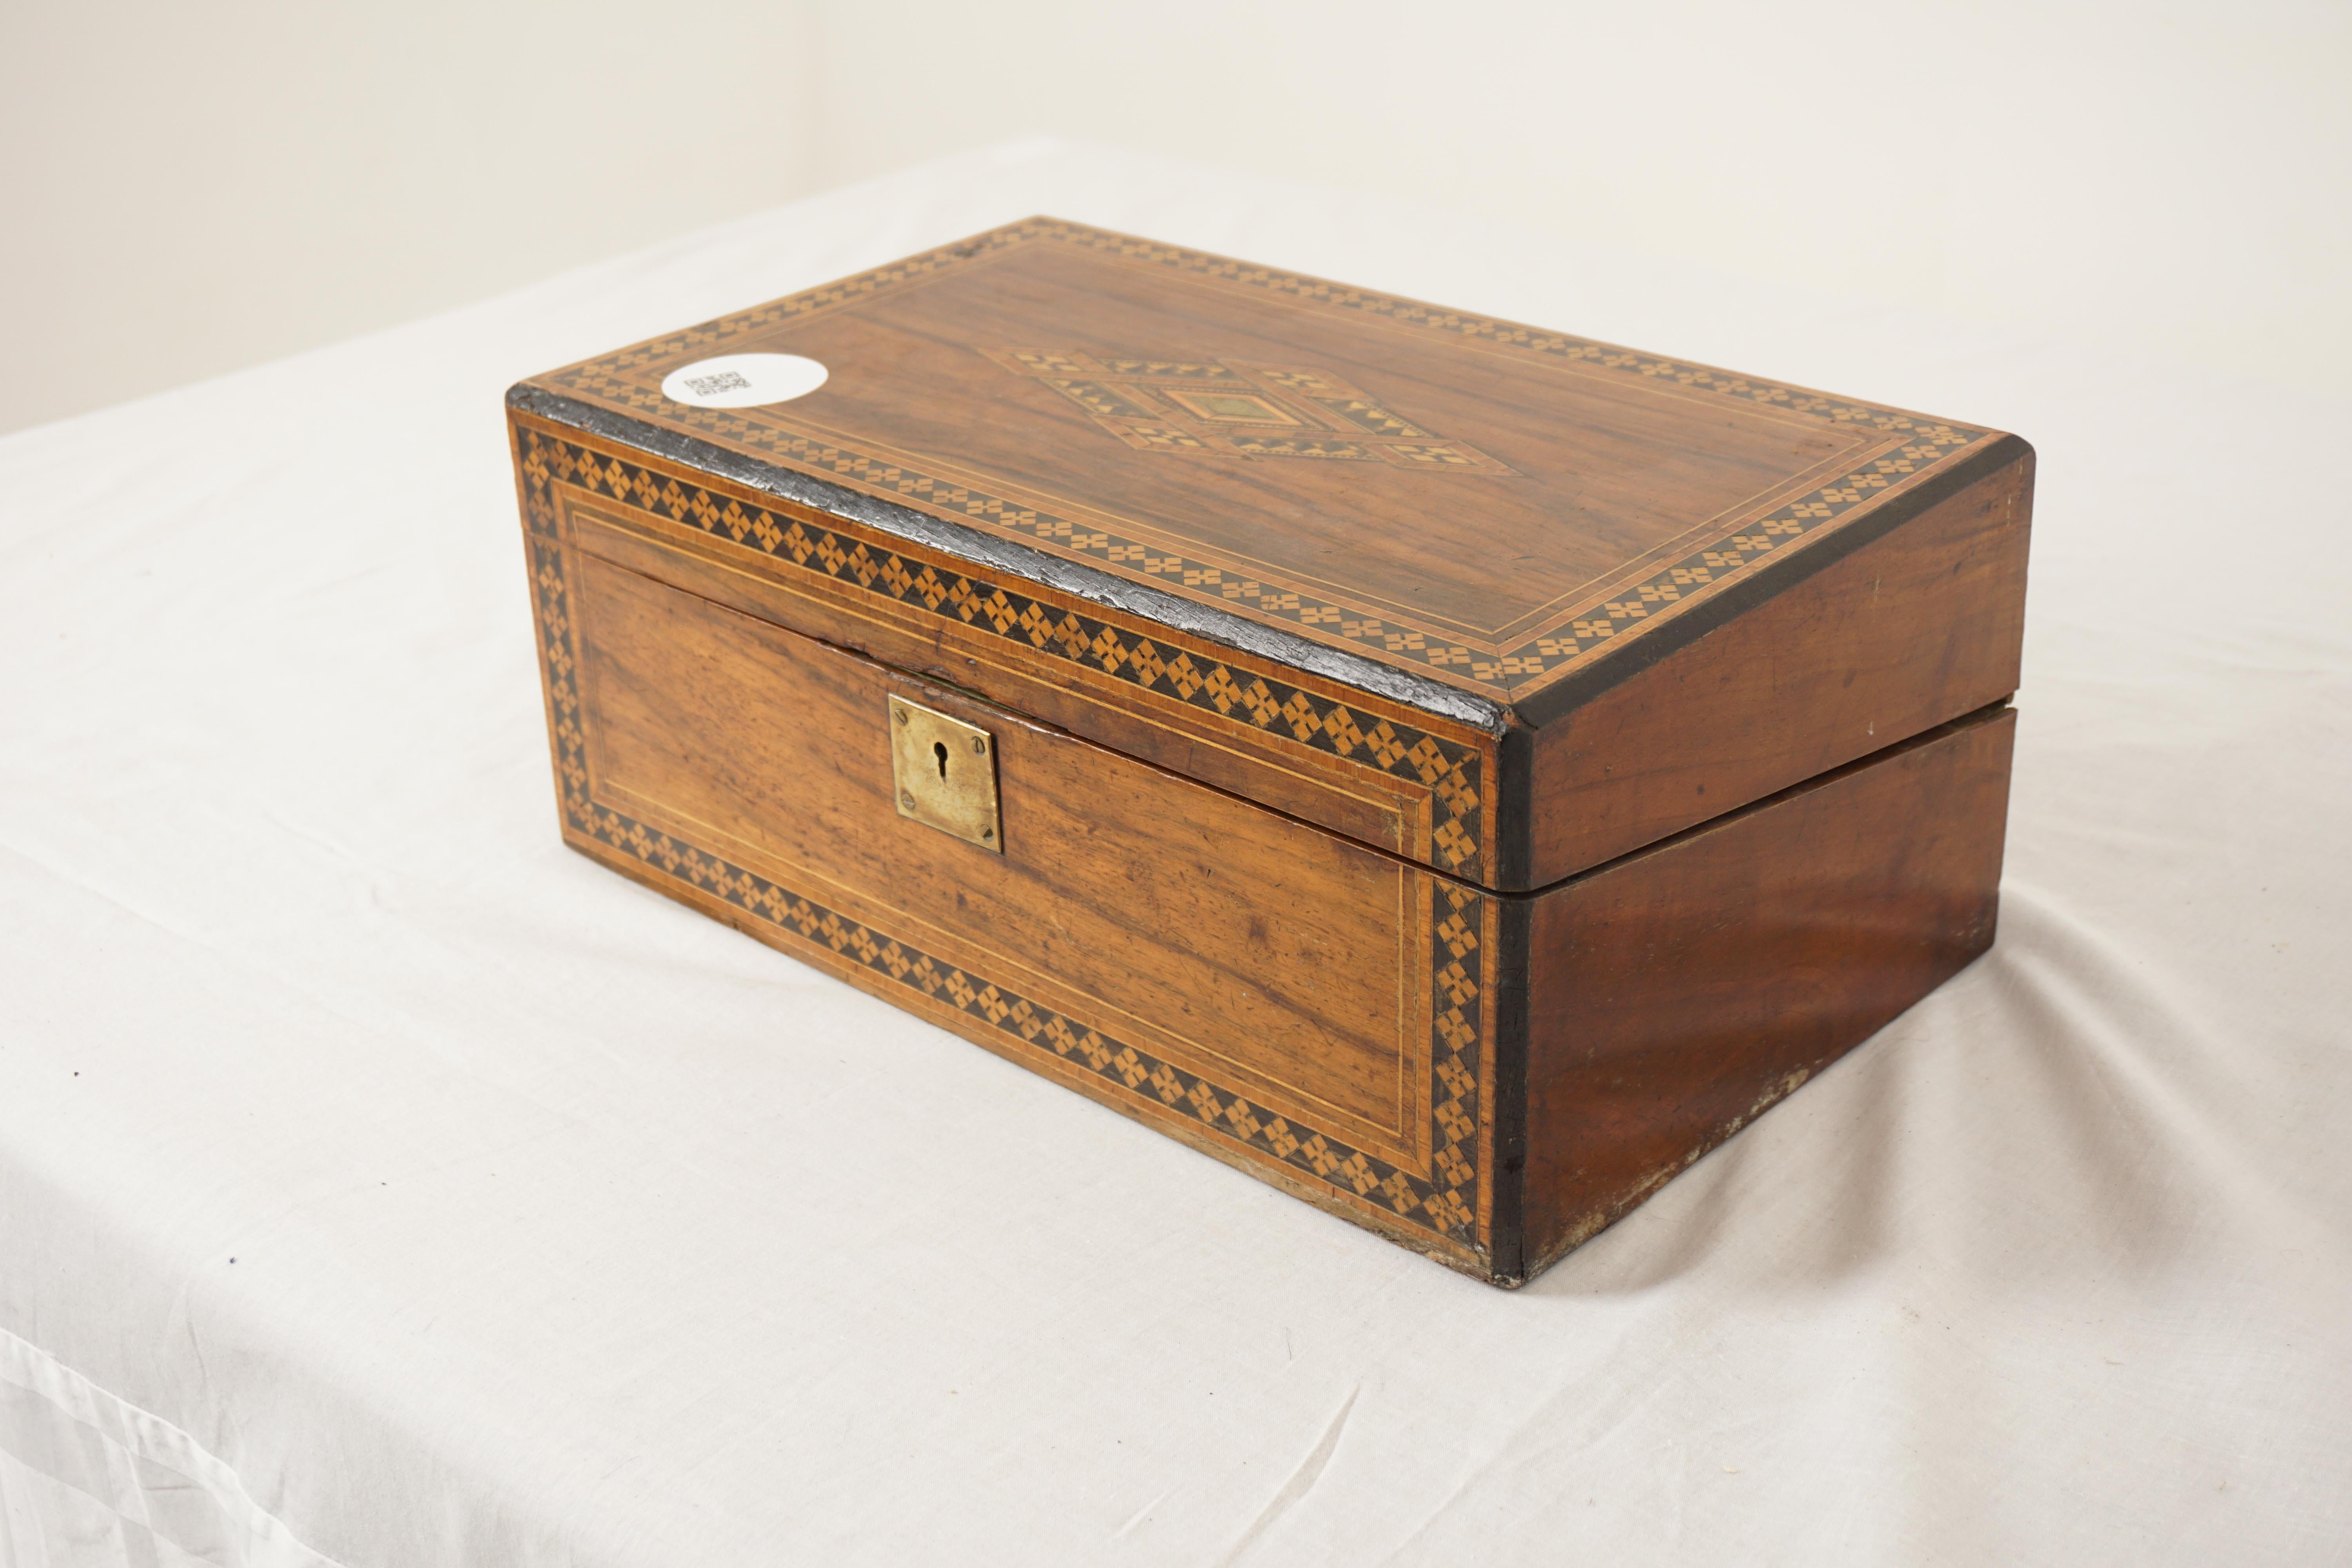 Ant. Victorian Inlaid Turnbridge Ware Writing Box, Scotland 1870, H1036

Scotland 1870
Mixed Woods
Original Finish
Heavily inlaid top and front with brass plate
Opens to reveal a pull out writing slope with lift up pen hold, space for two